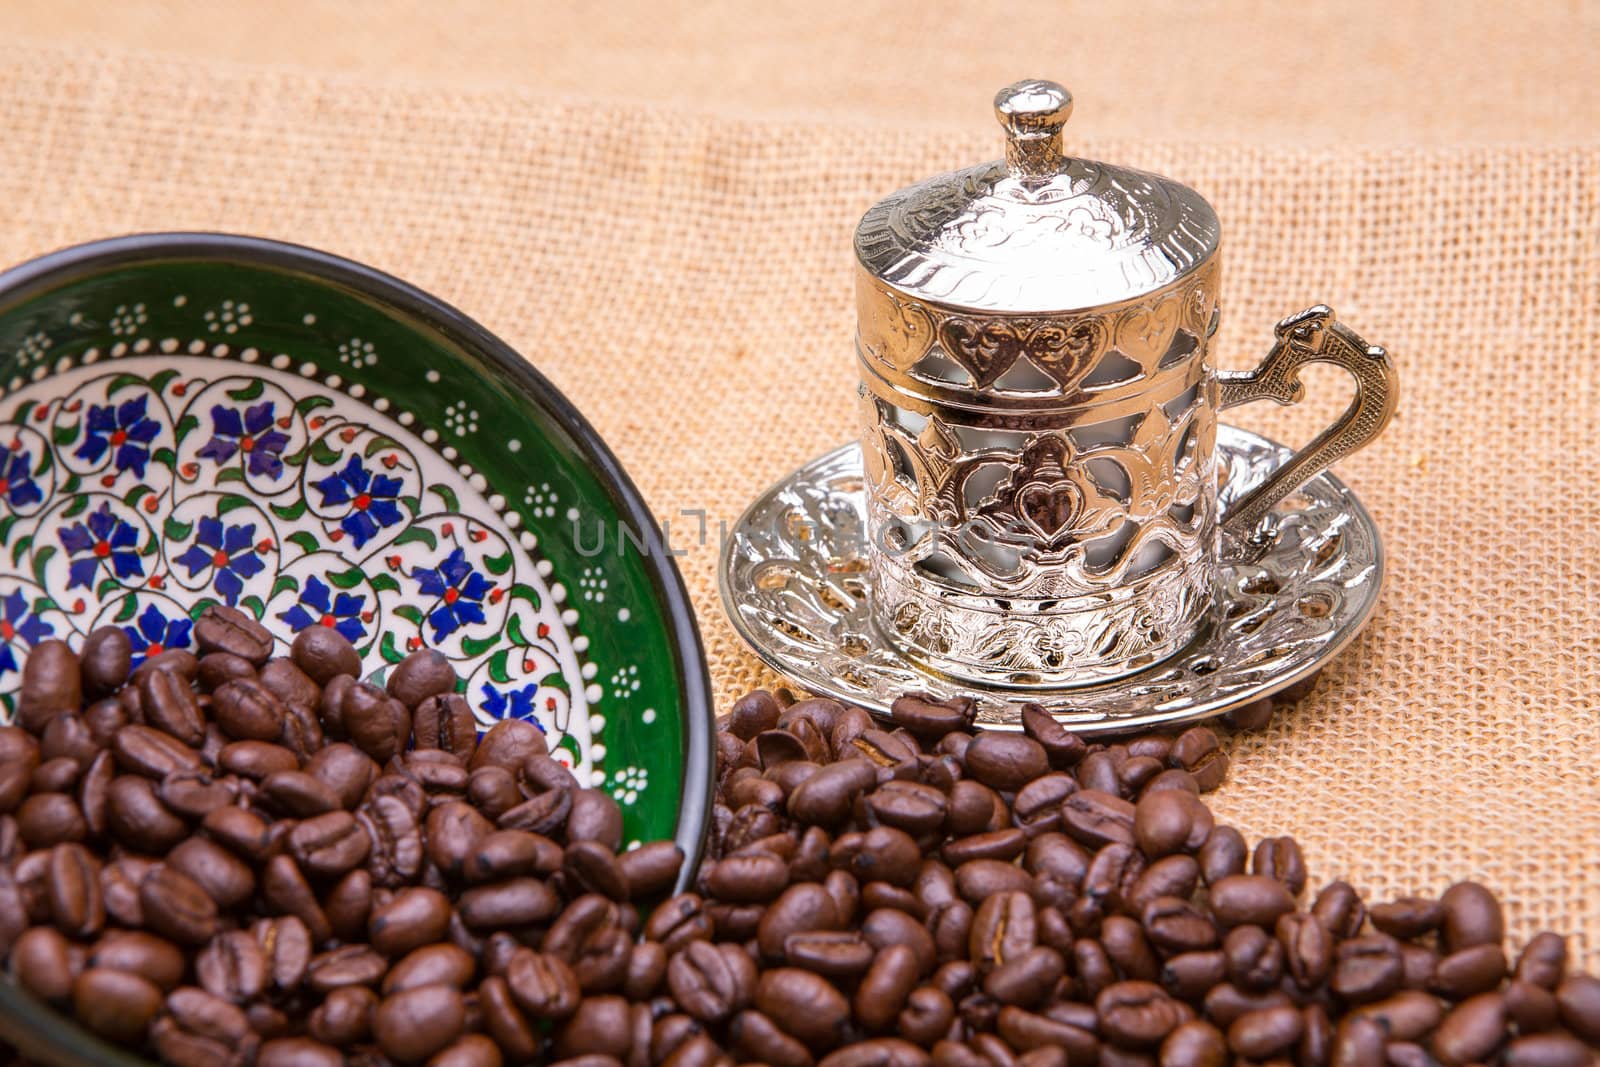 Authentic Turkish coffee cup with coffee beans. Coffee beans spilled on burlap from hand painted pottery.